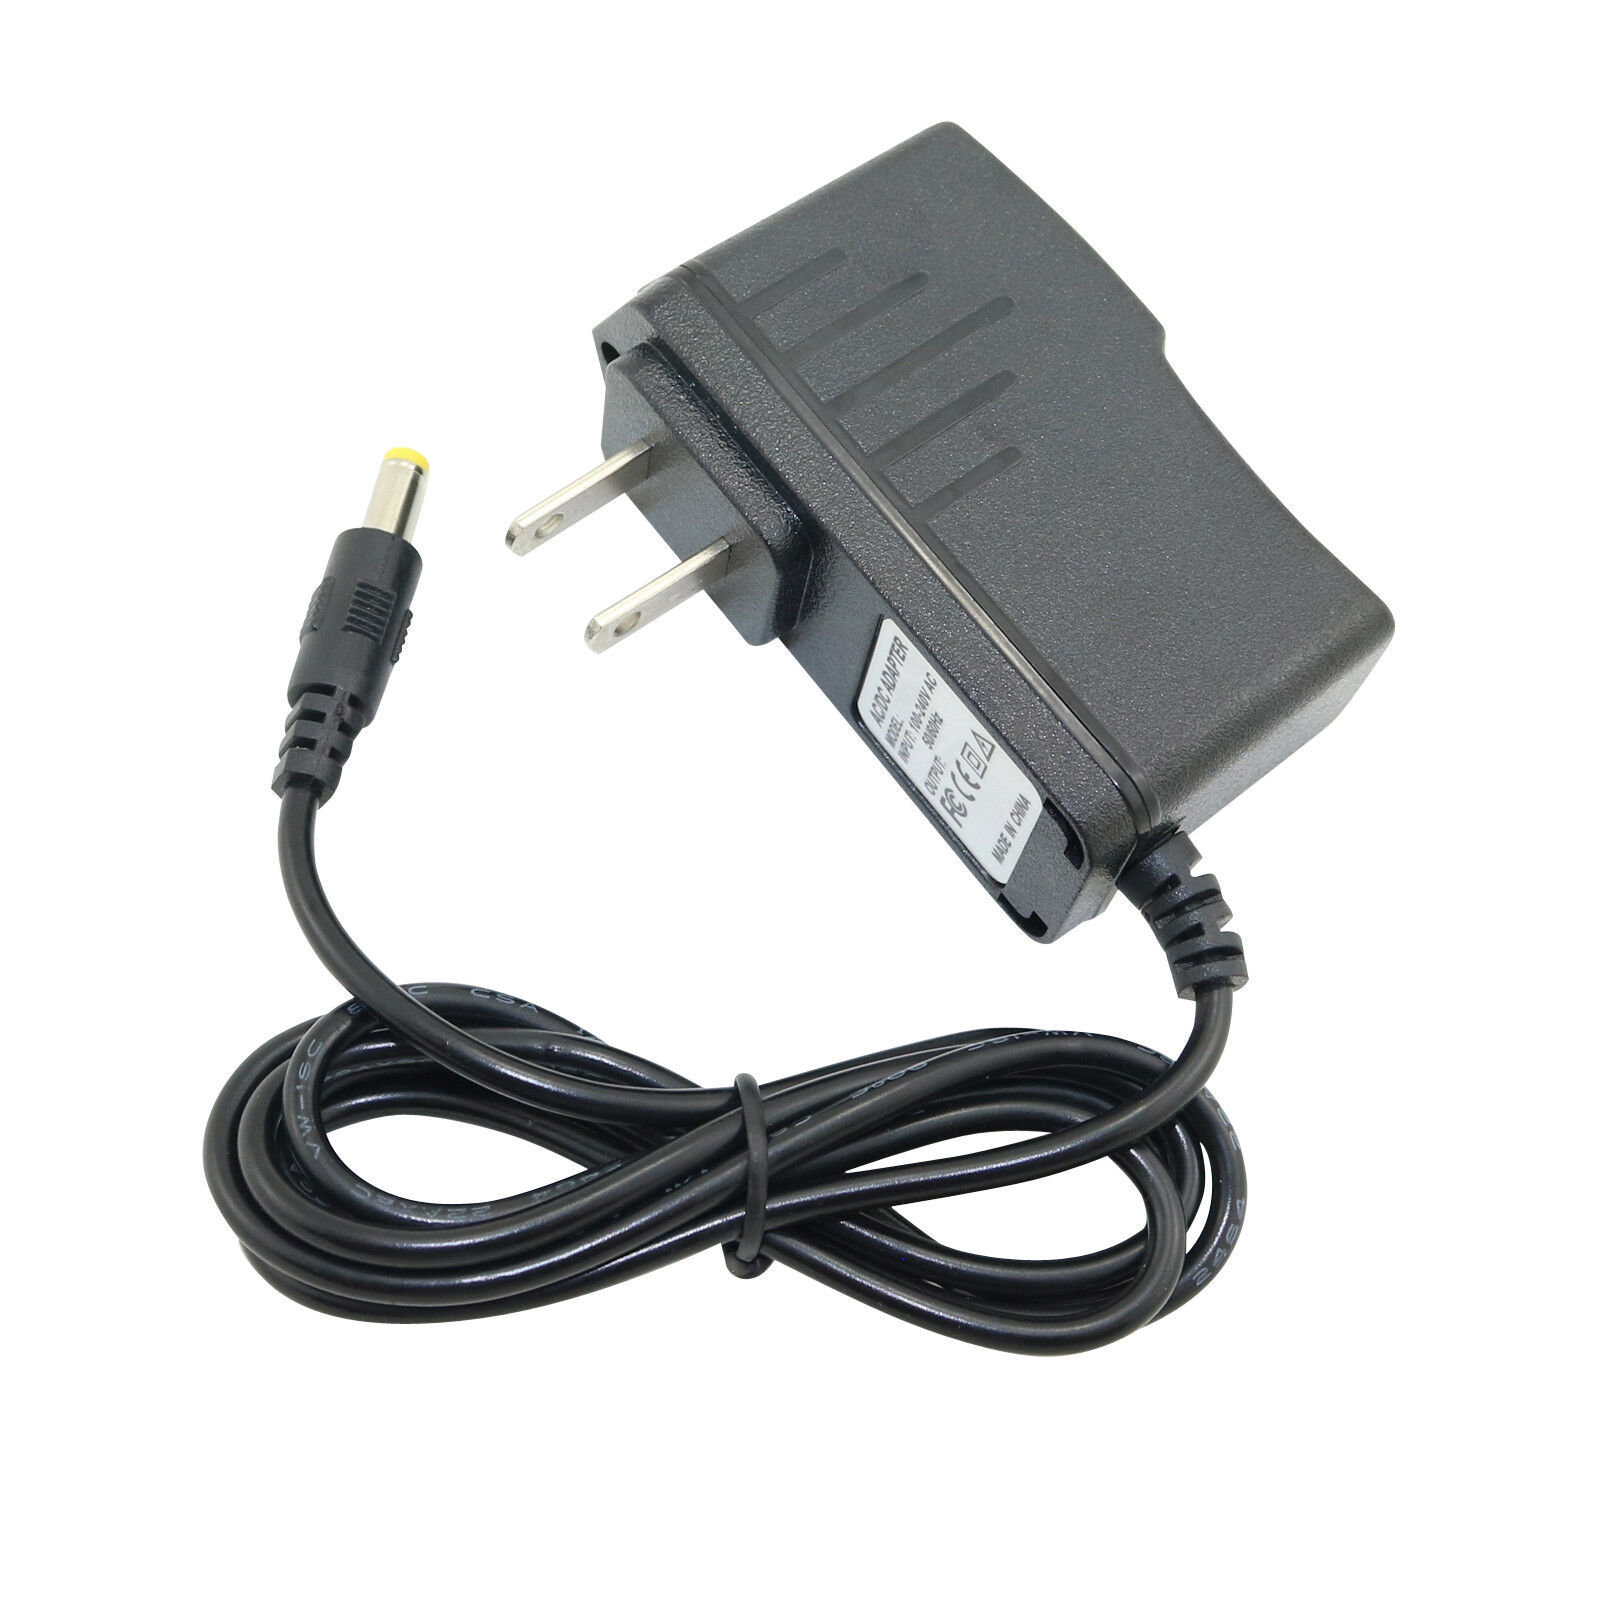 Primary image for Ac/Dc Adapter Charger Cord For Cisco Spa501G Spa502G Spa504G Power Supply